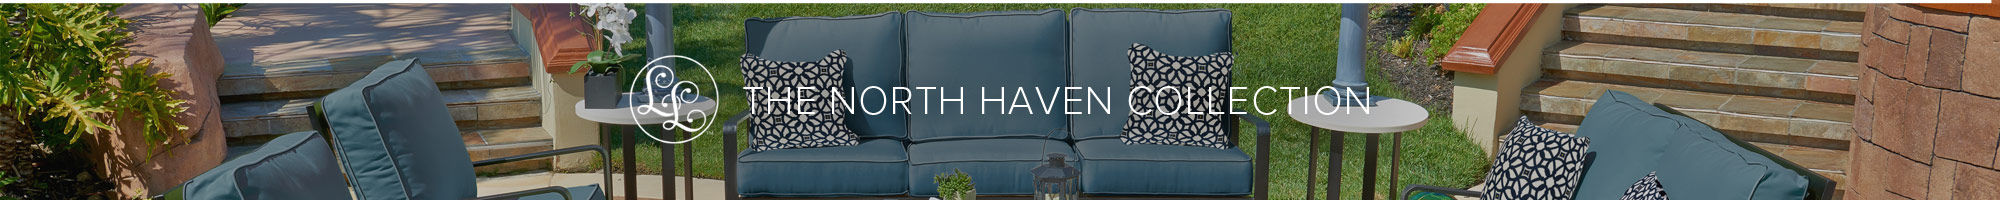 The North Haven Collection by Libby Langdon at Sun & Ski